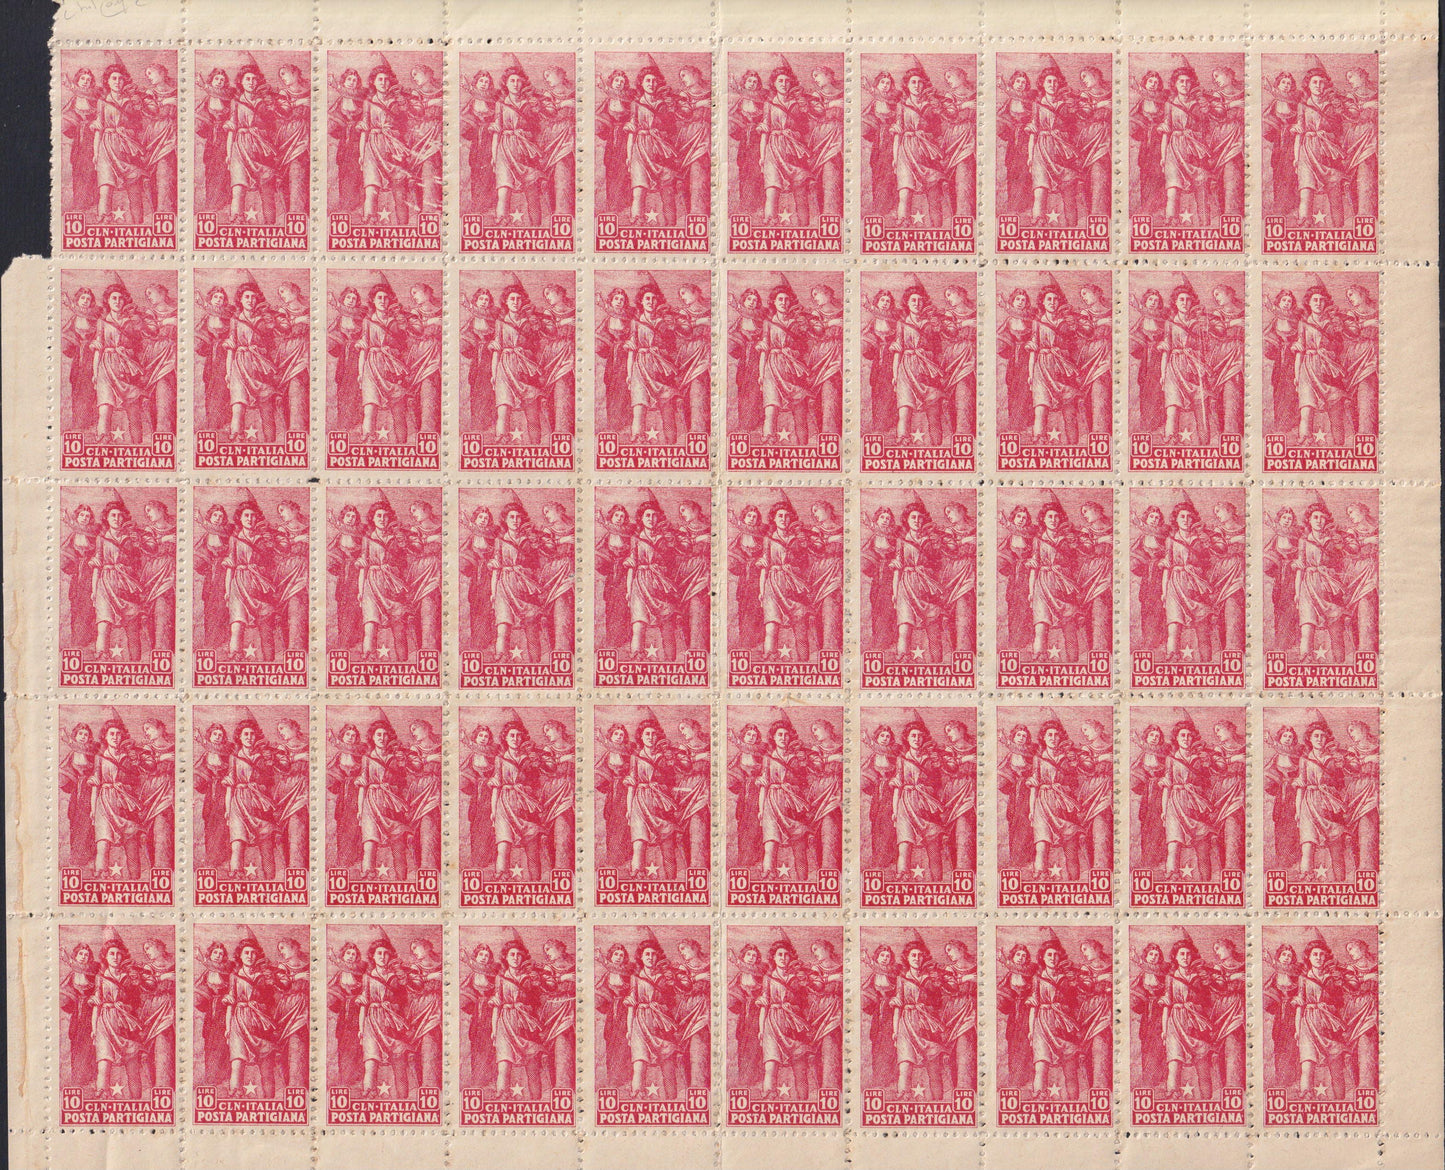 CLN94 - CLN PARMA, Posta Partigiana, the set of two complete sheets of 50 copies including all the lithographic varieties cataloged by Errani Raybaudi, Rarity! (1, 2).